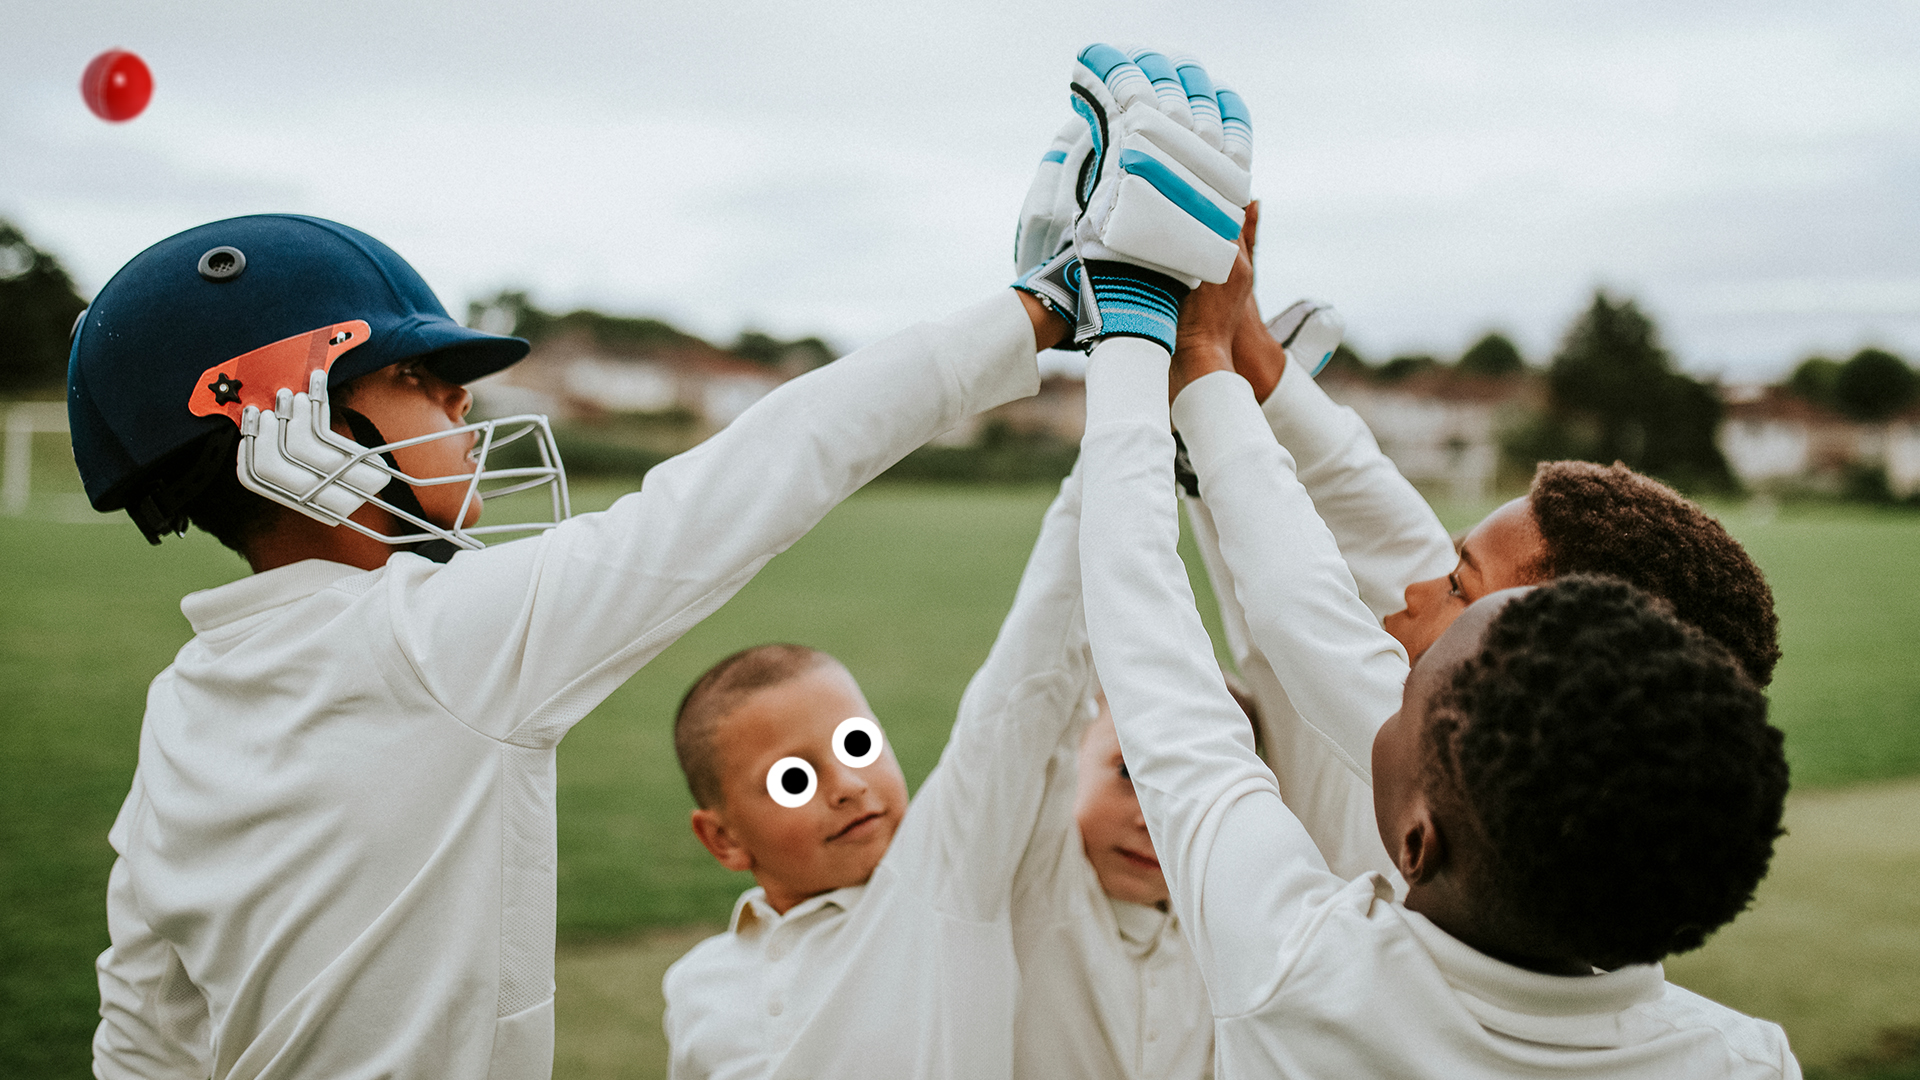 A young cricket team celebrate a win